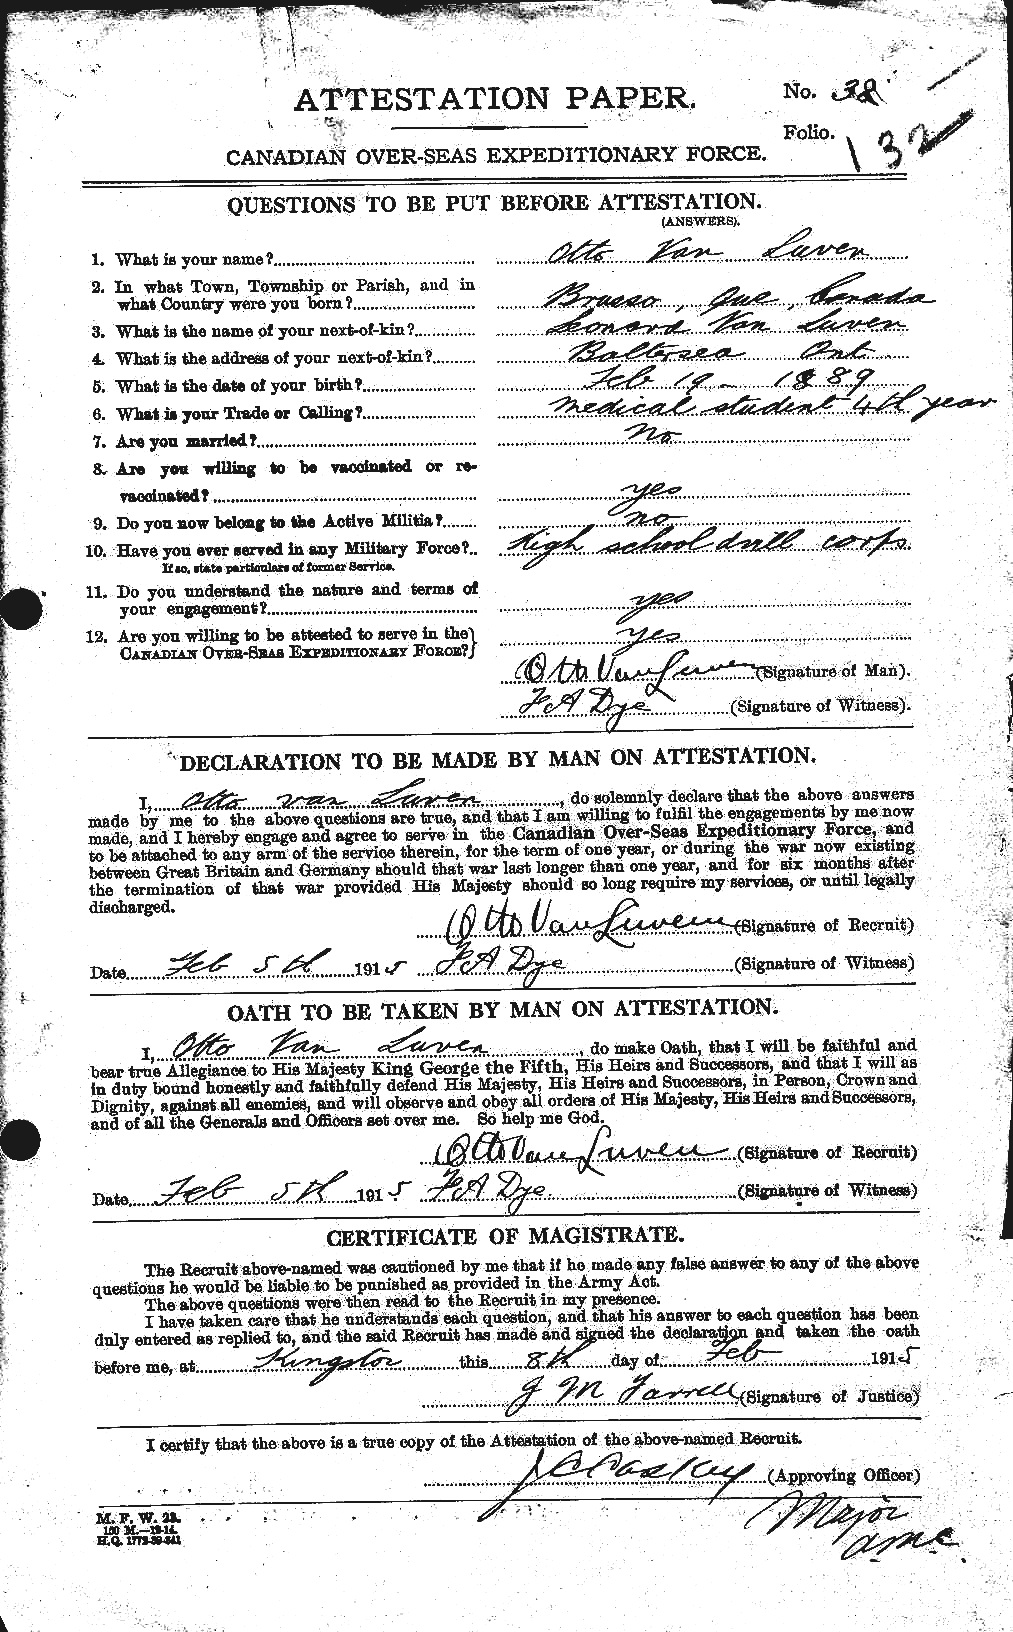 Personnel Records of the First World War - CEF 647587a